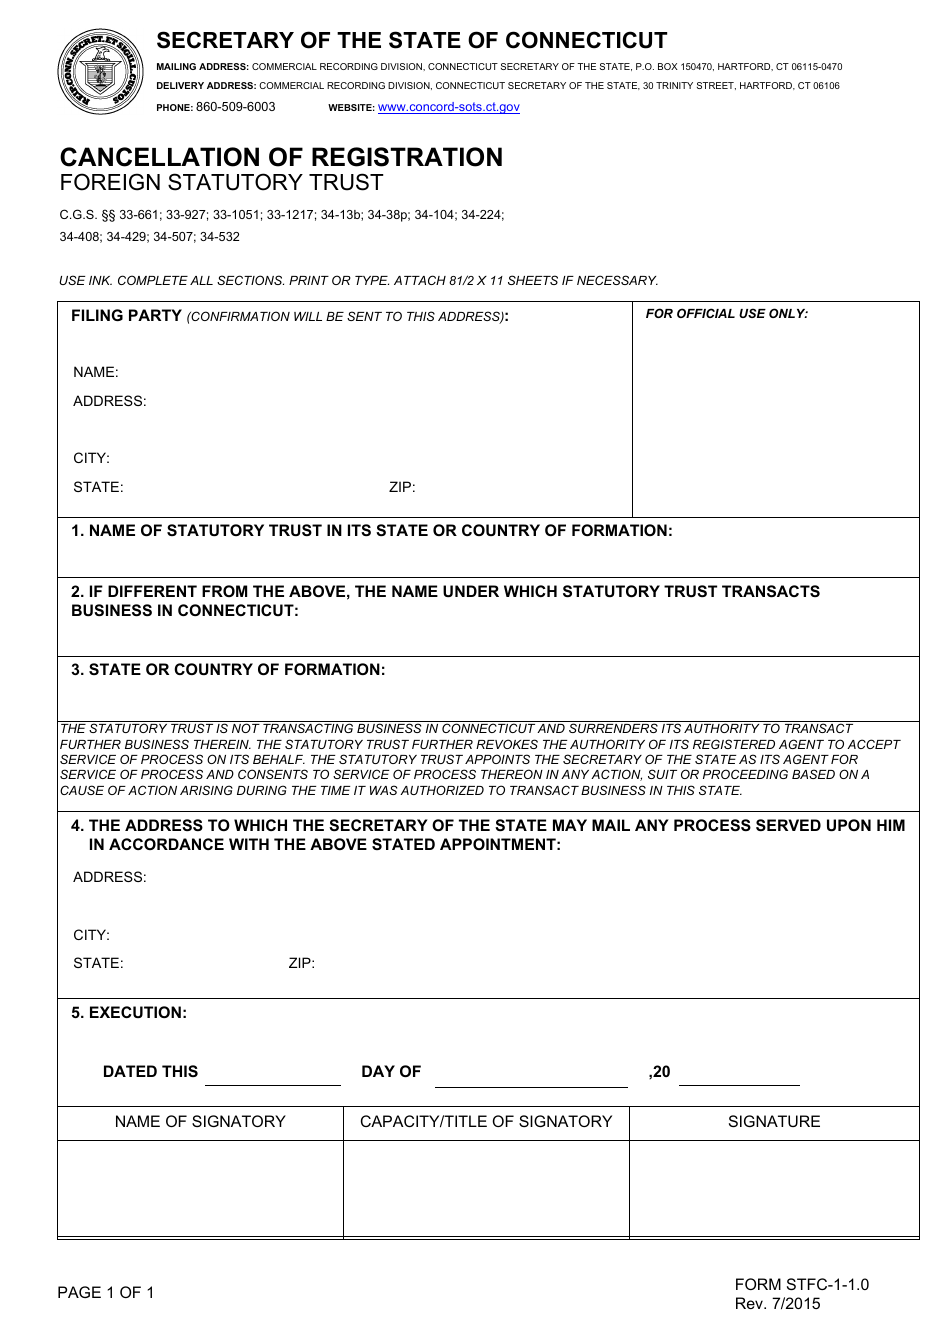 Form STFC-1-1.0 Cancellation of Registration - Foreign Statutory Trust - Connecticut, Page 1